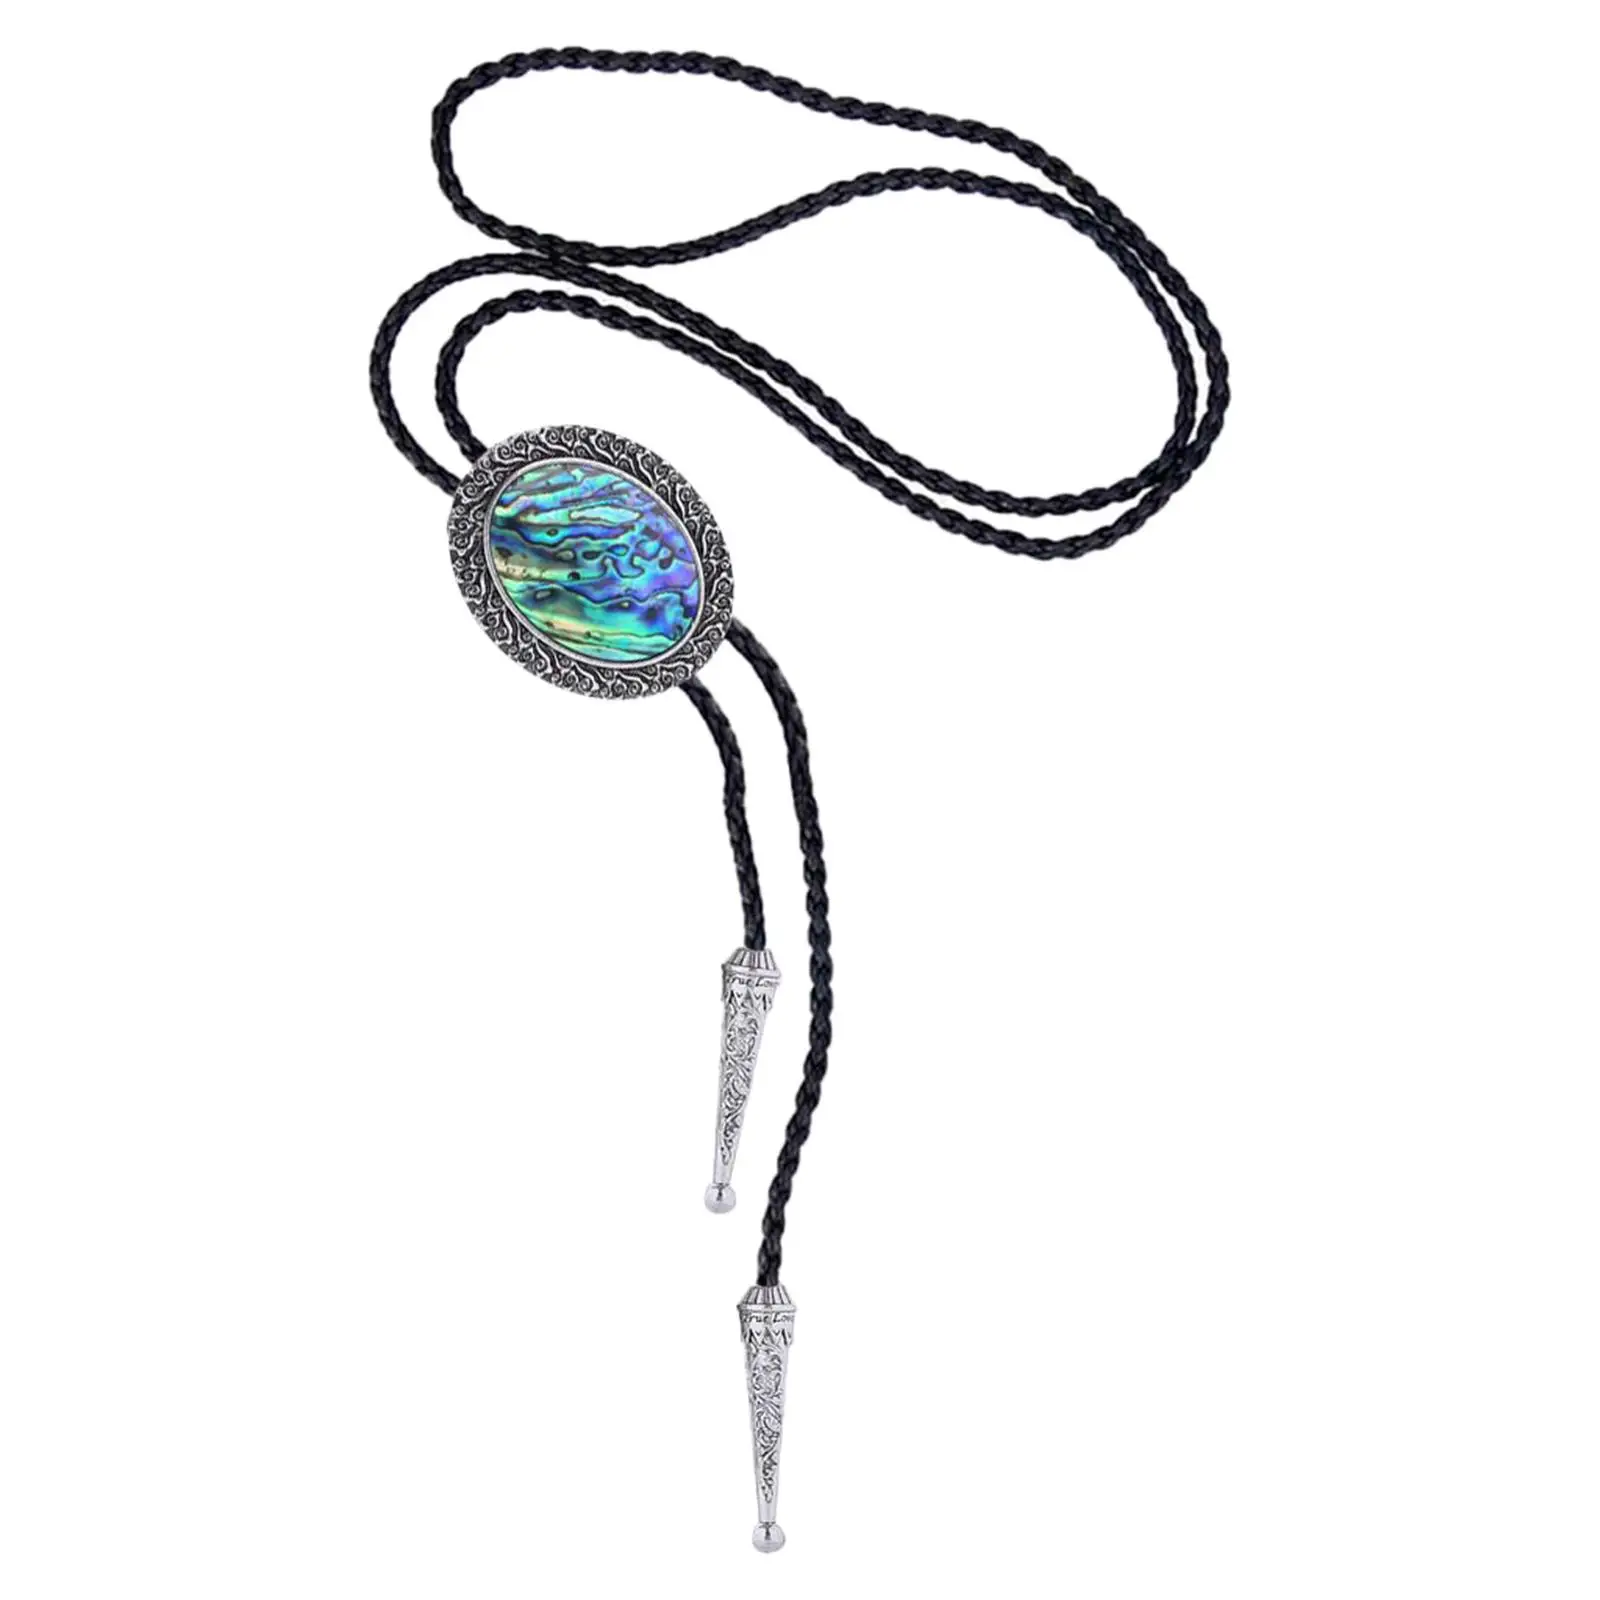 Stylish Vintage Style Bolo Tie Western Necklace Tie for Women Teens Adults Birthday Gift